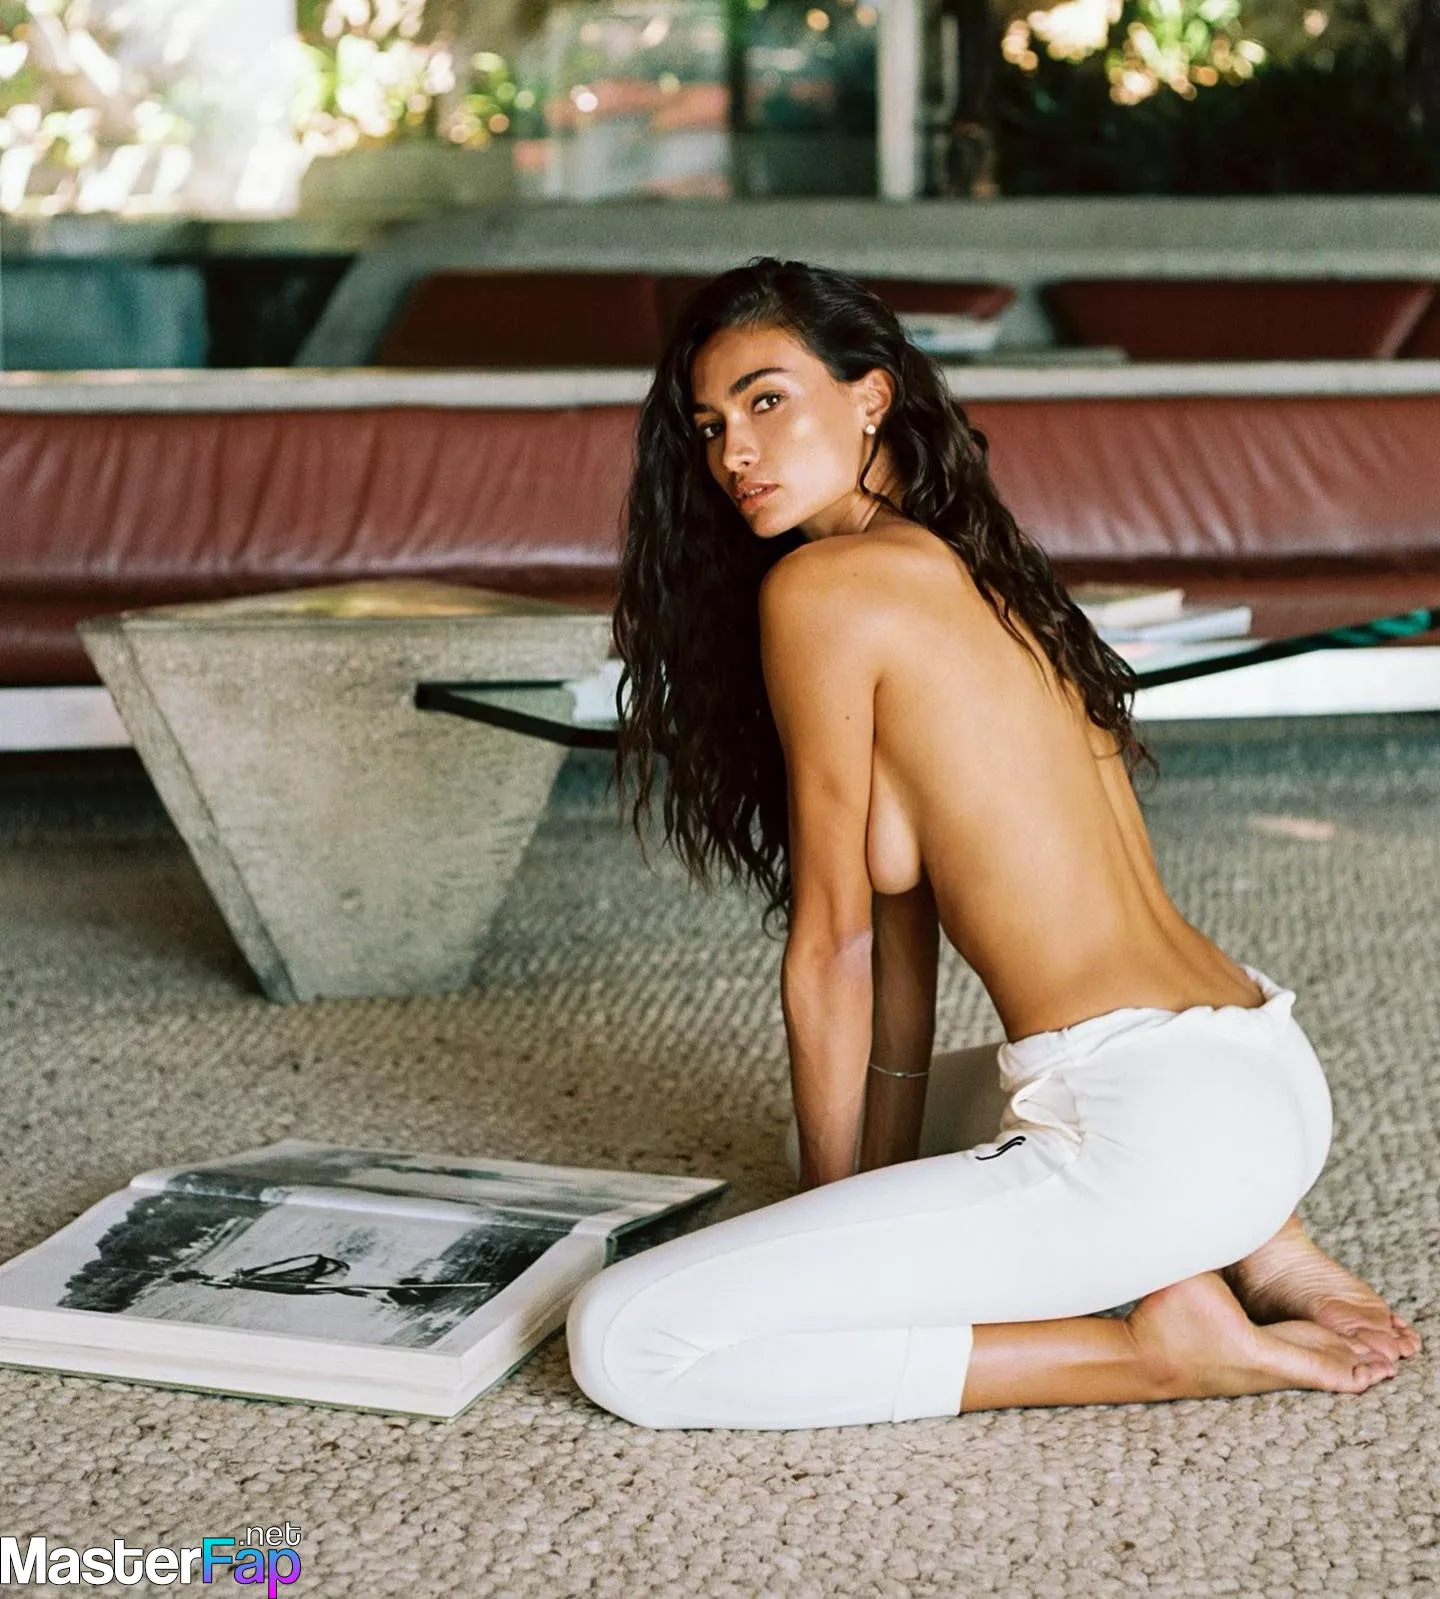 Kelly gale hot